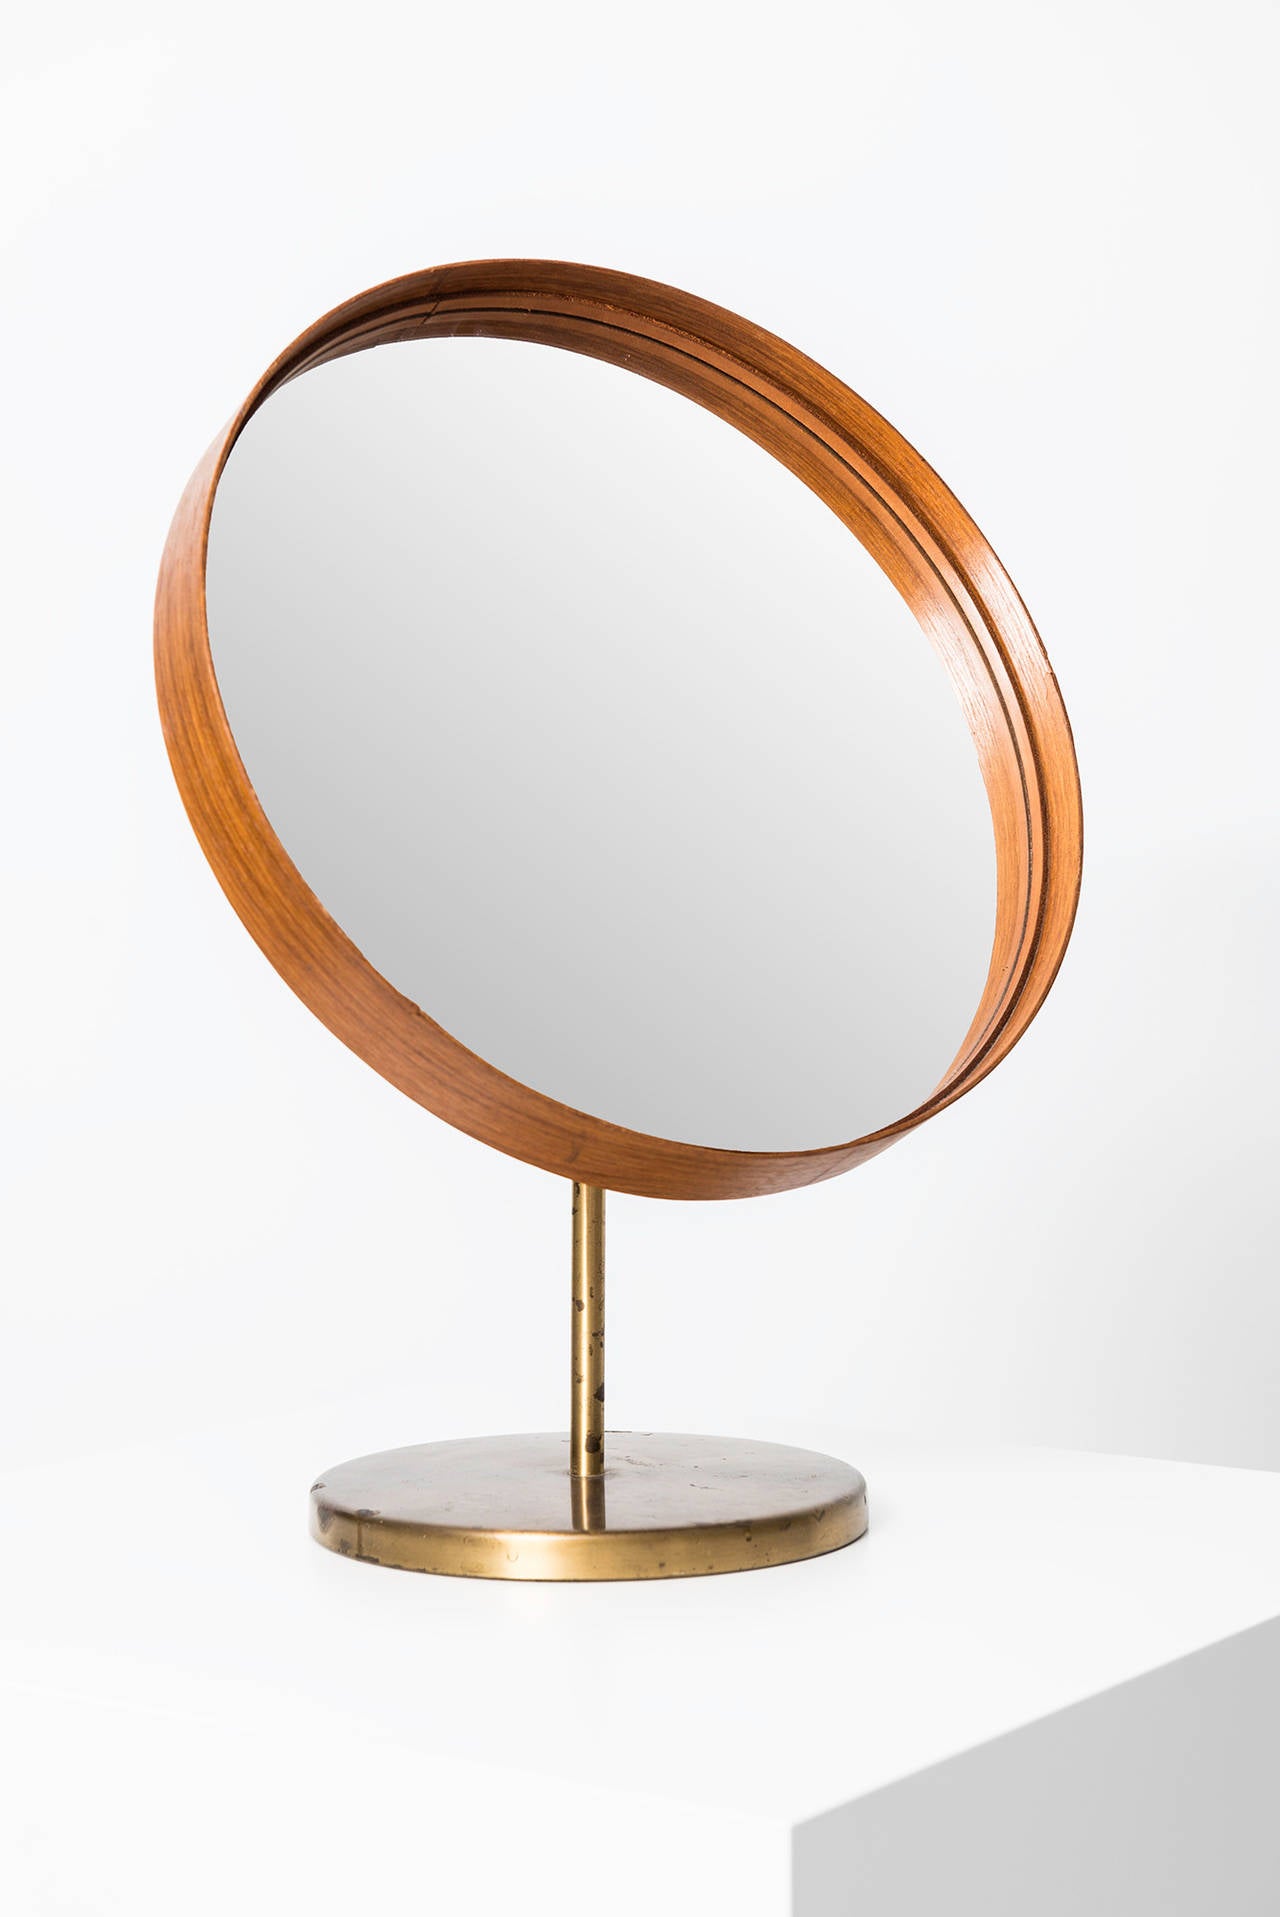 Swedish Table Mirror in Teak and Brass by Glasmäster in Markaryd, Sweden